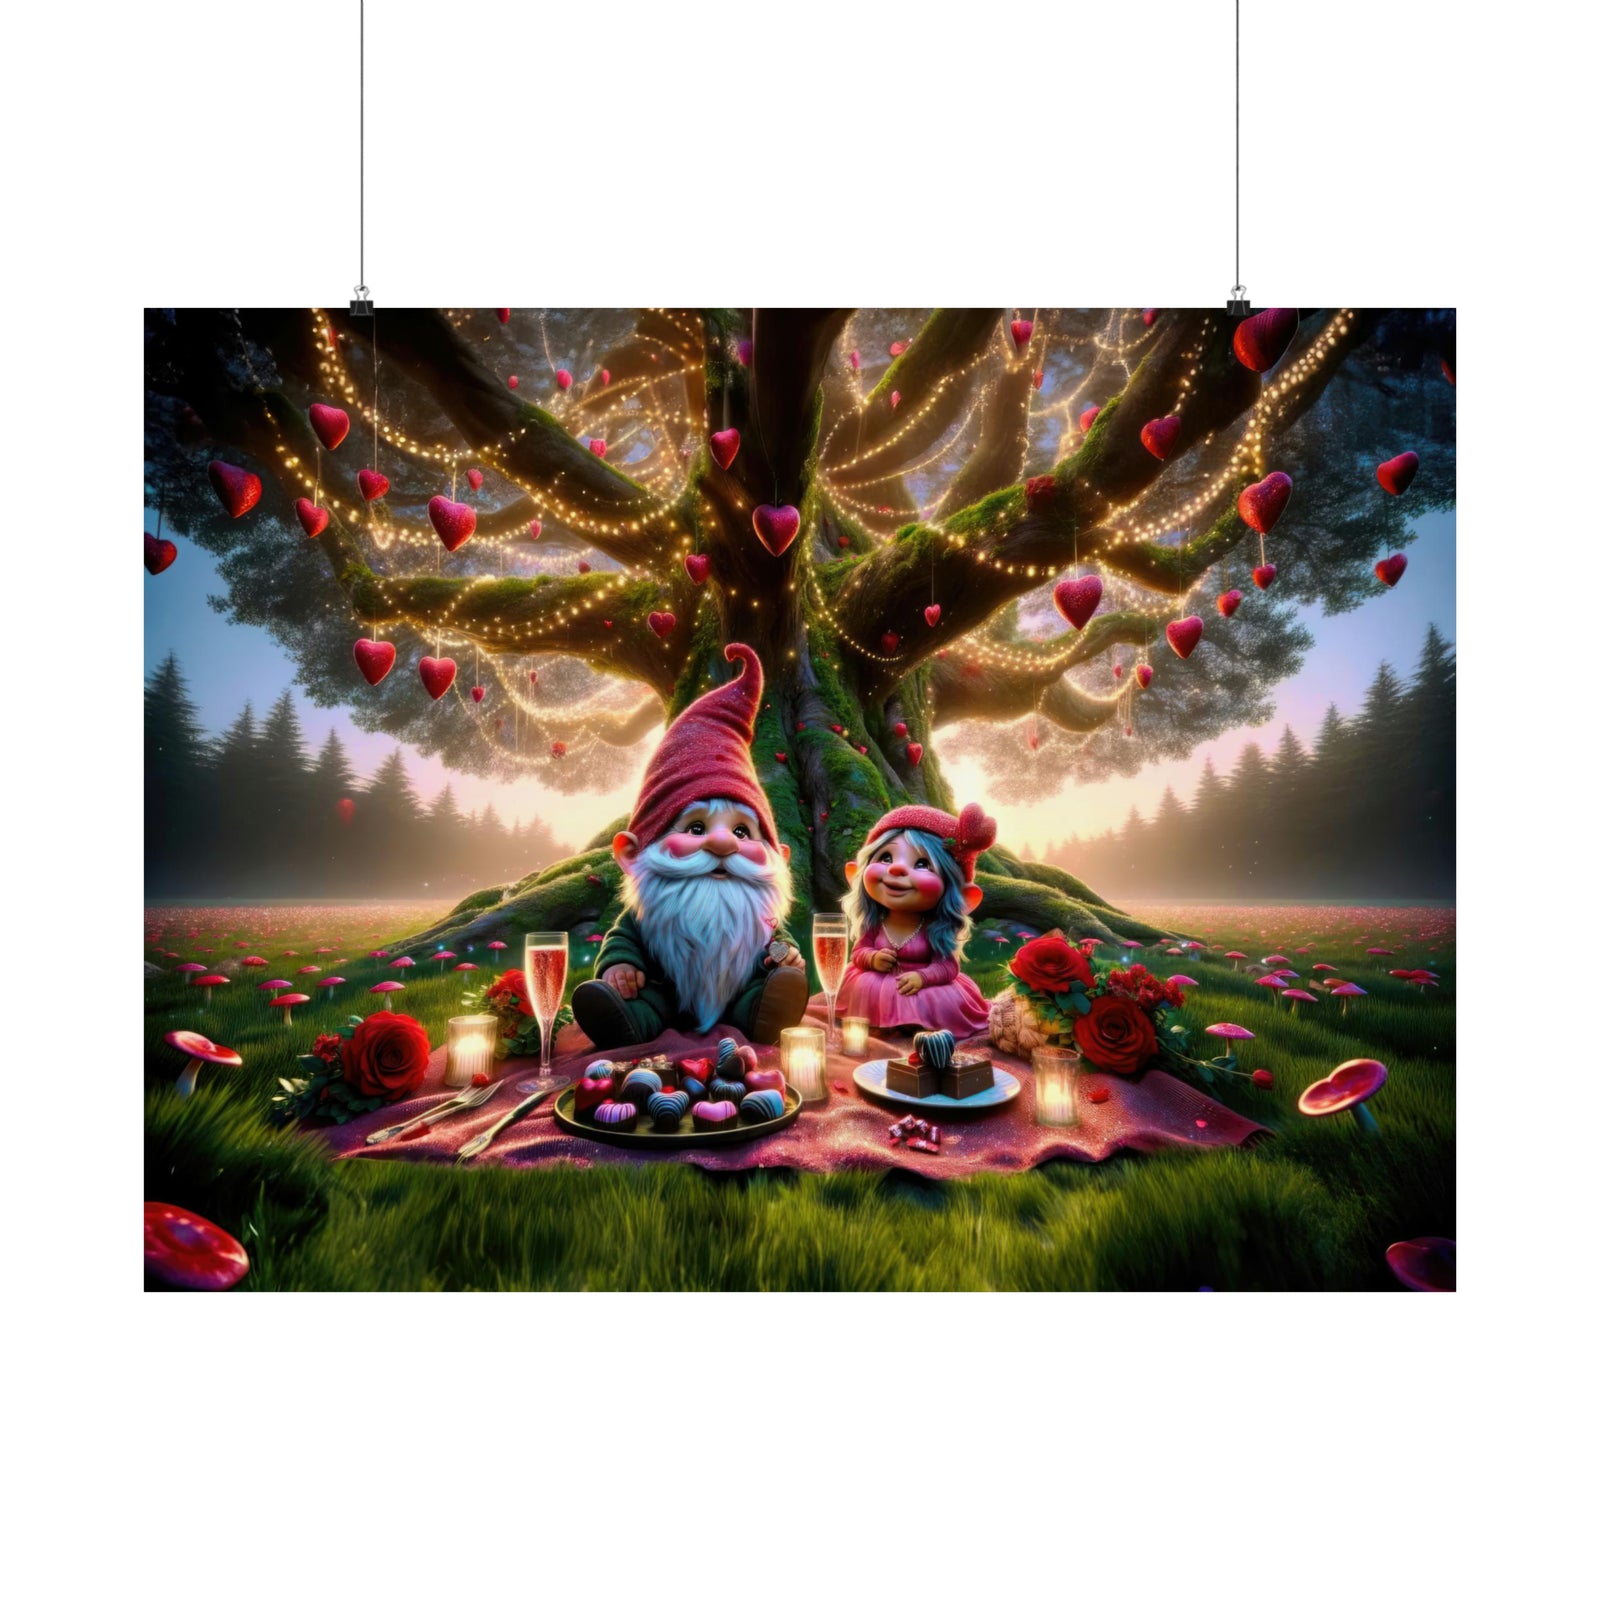 Enchanted Valentine's Eve in the Whimsical Woodlands Poster